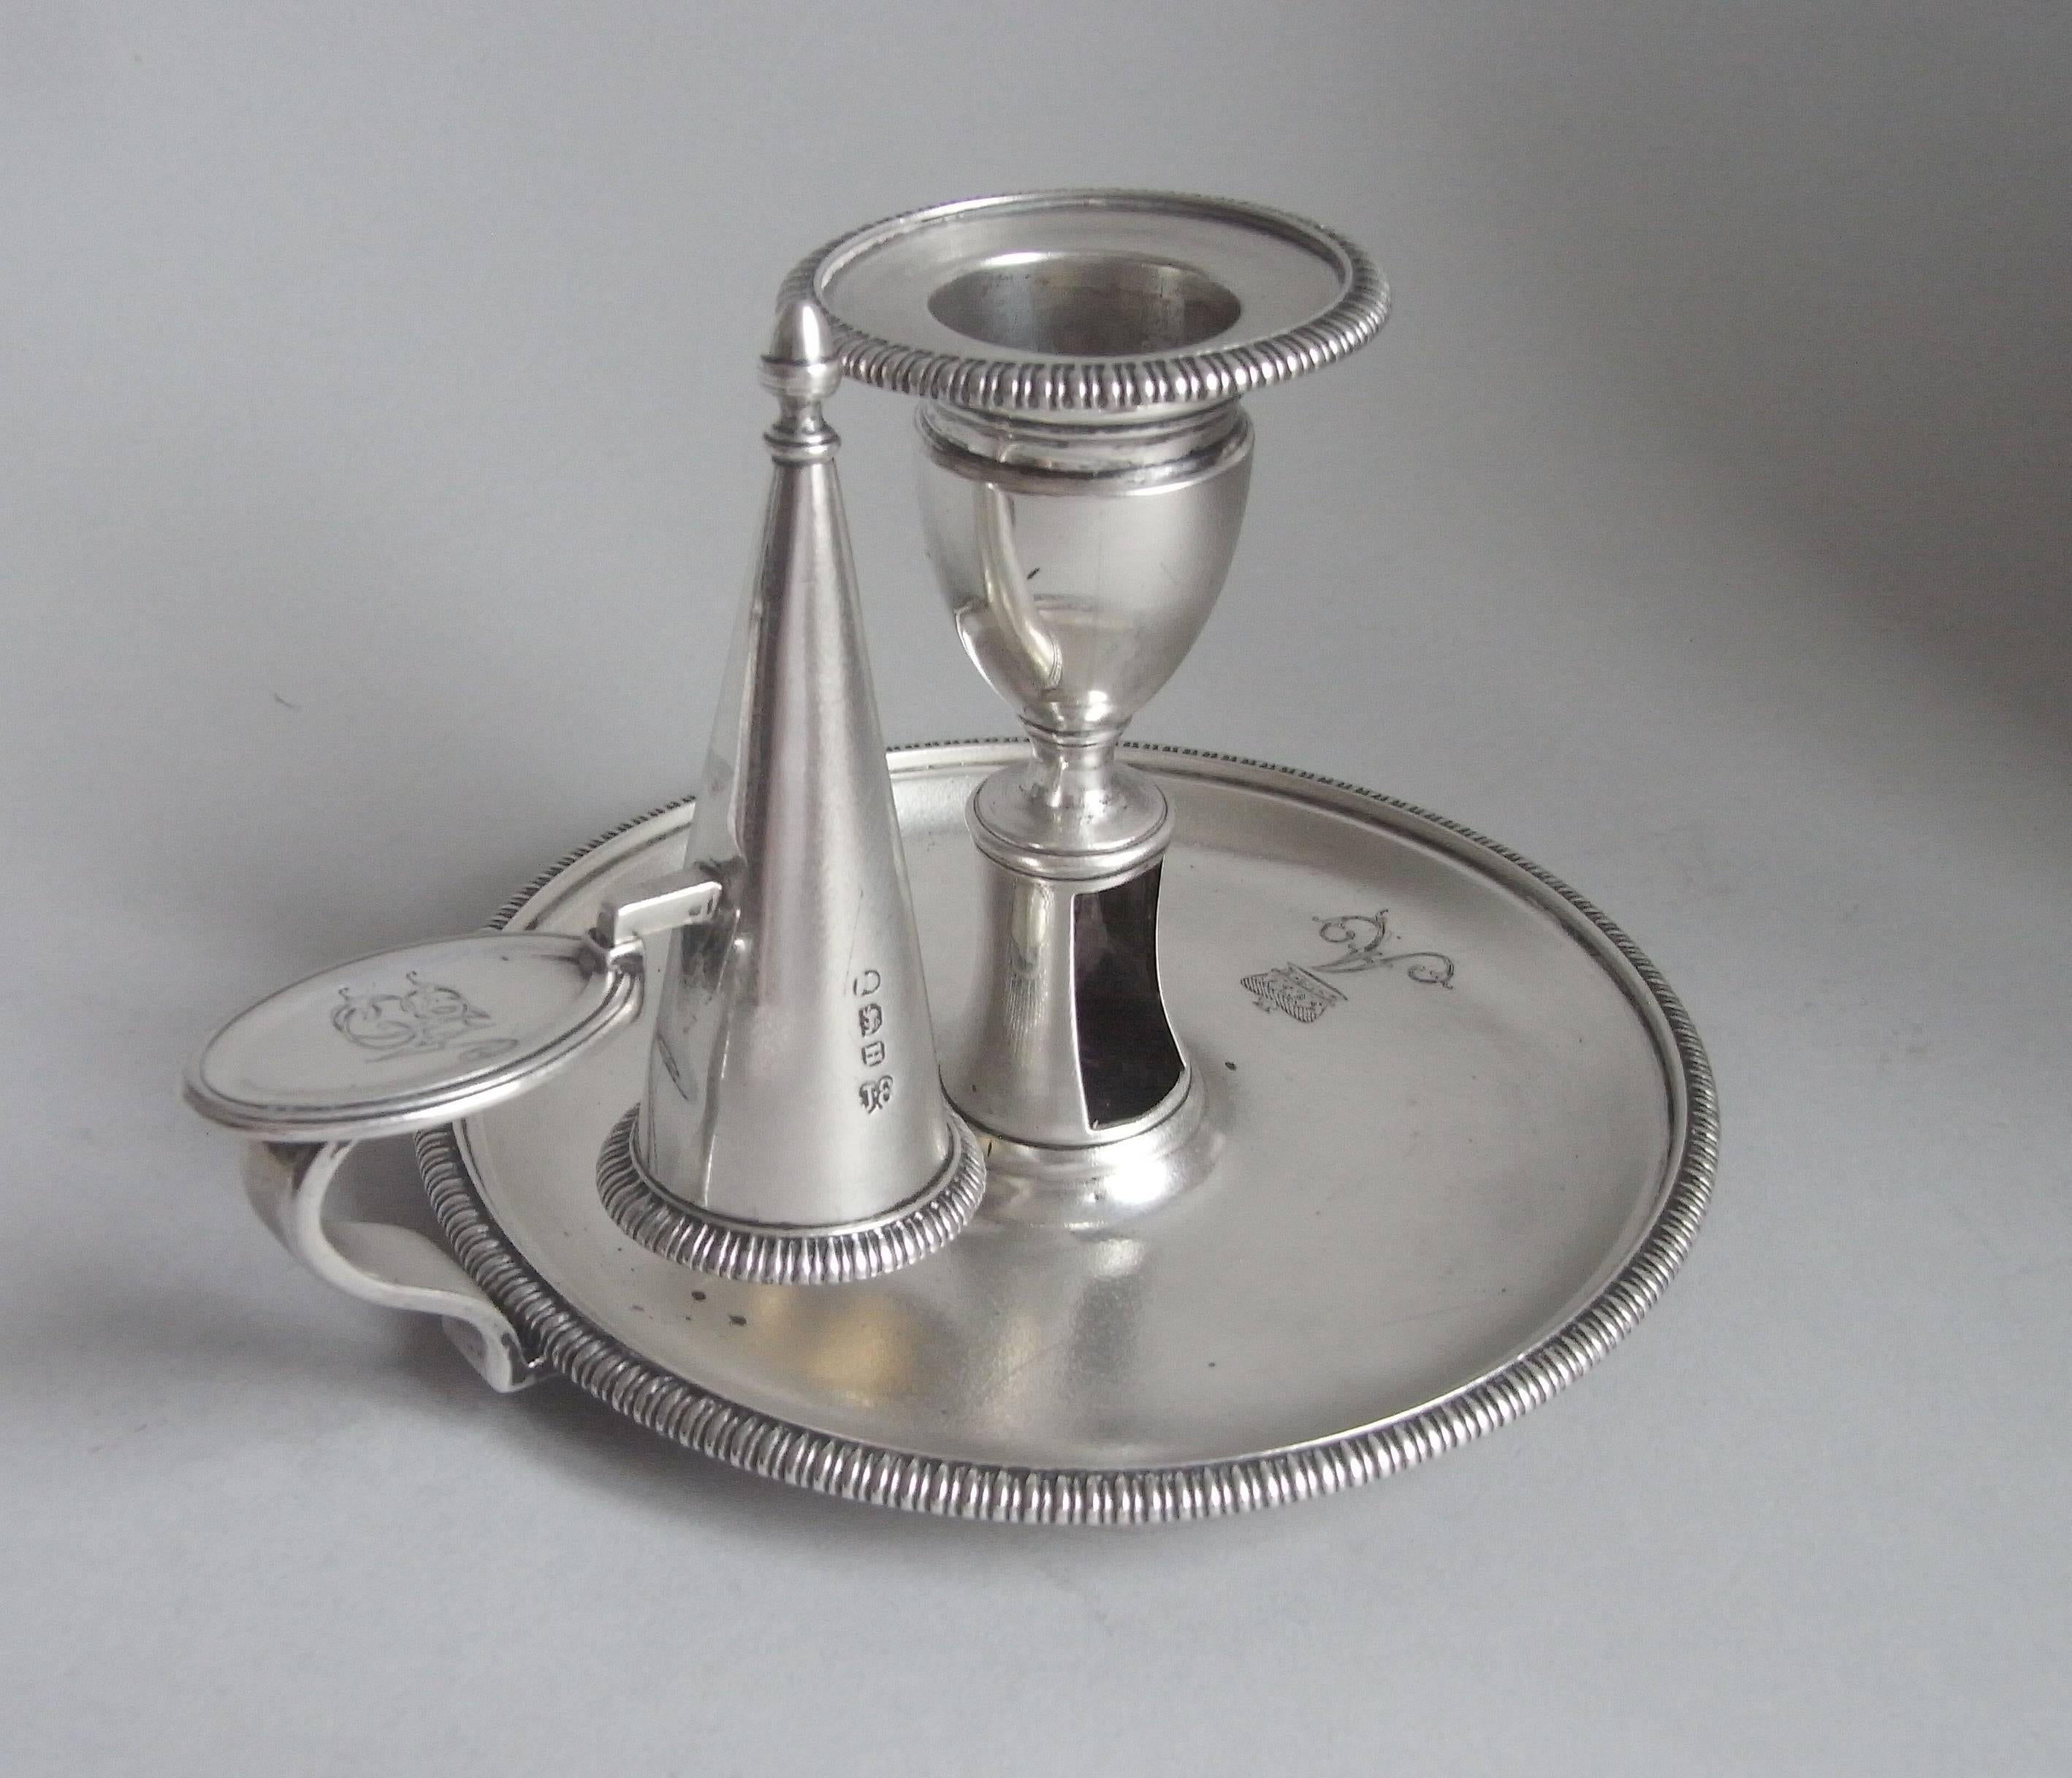 English ROYAL - A very fine George III Chamber Candlestick by John Emes.